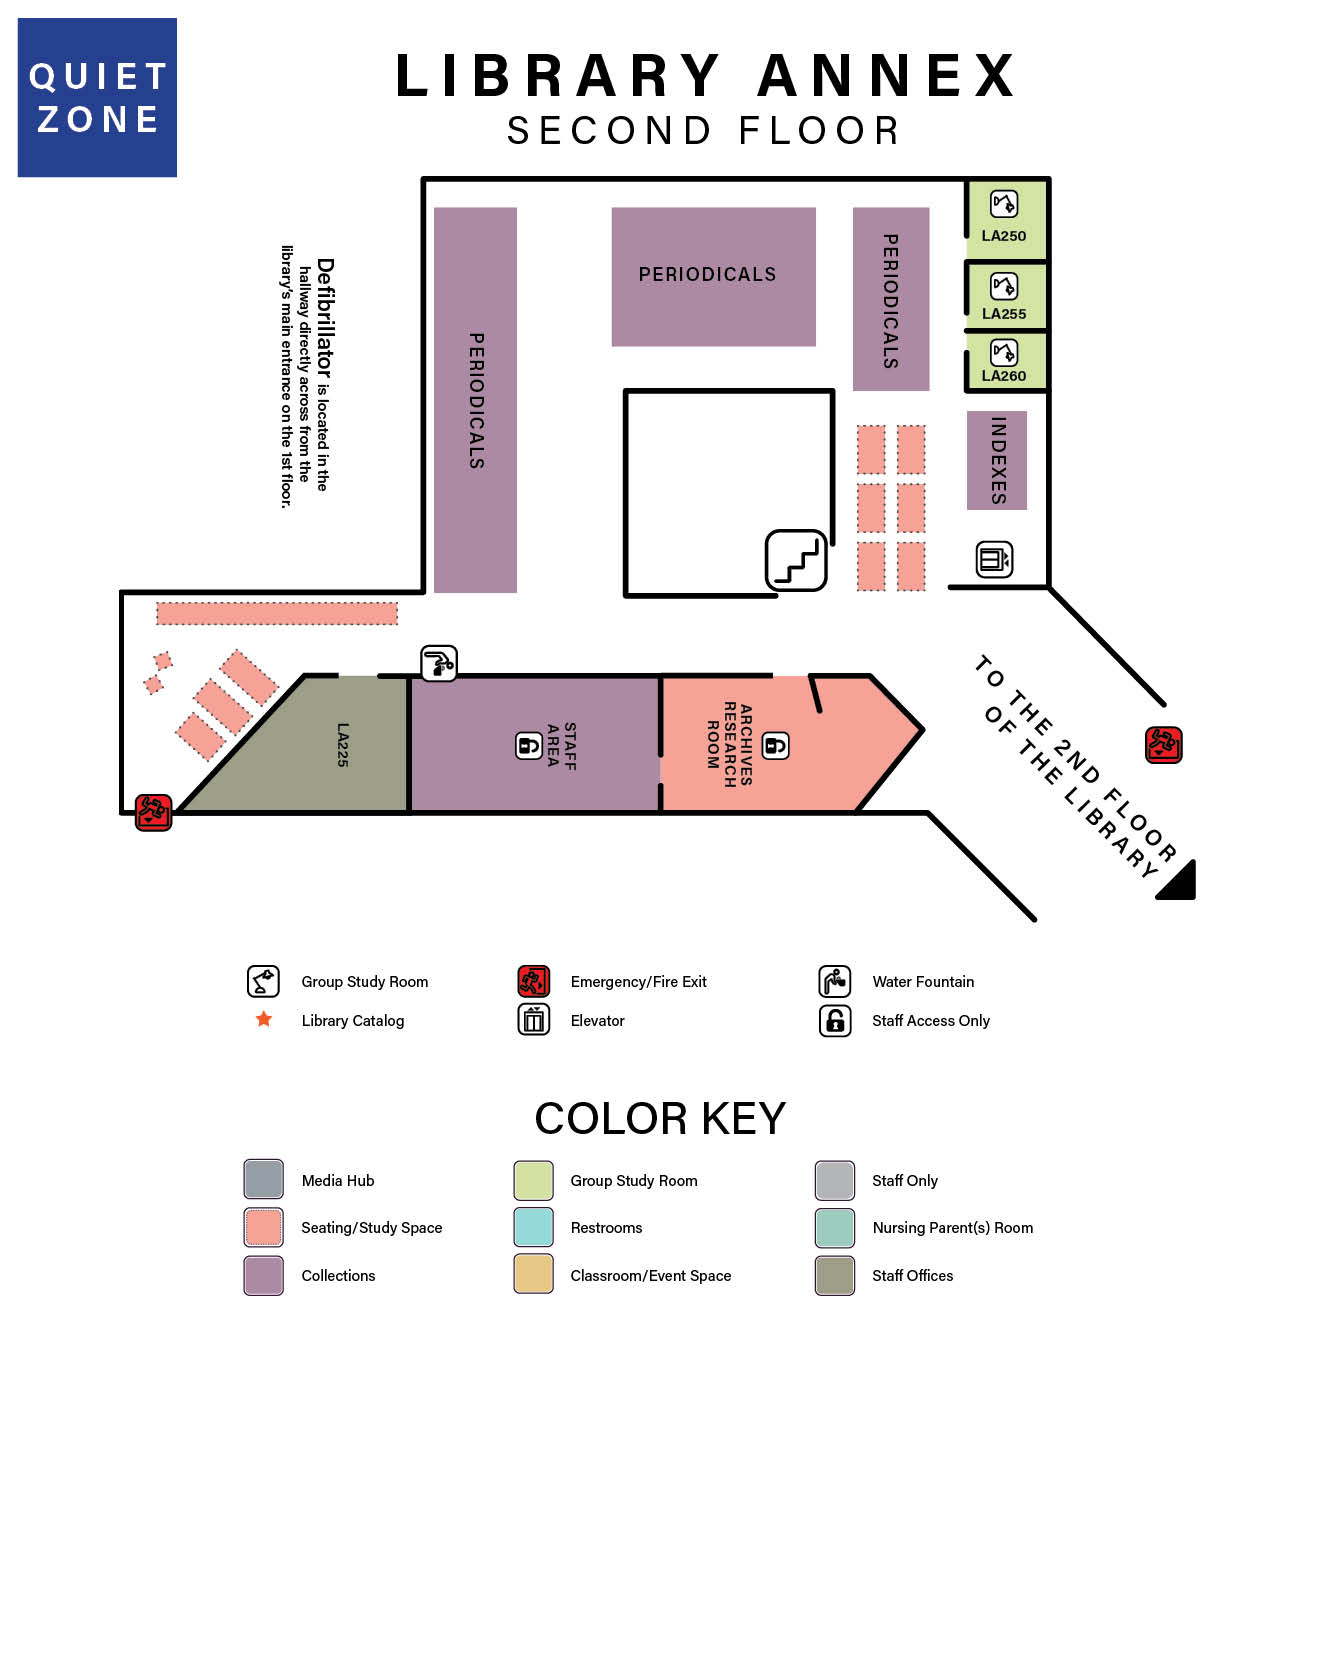 a floor map of of the library annex second floor, which shows room numbers, and space names, and also includes information such as stairwell access, emergency exits, bathrooms, etc.  